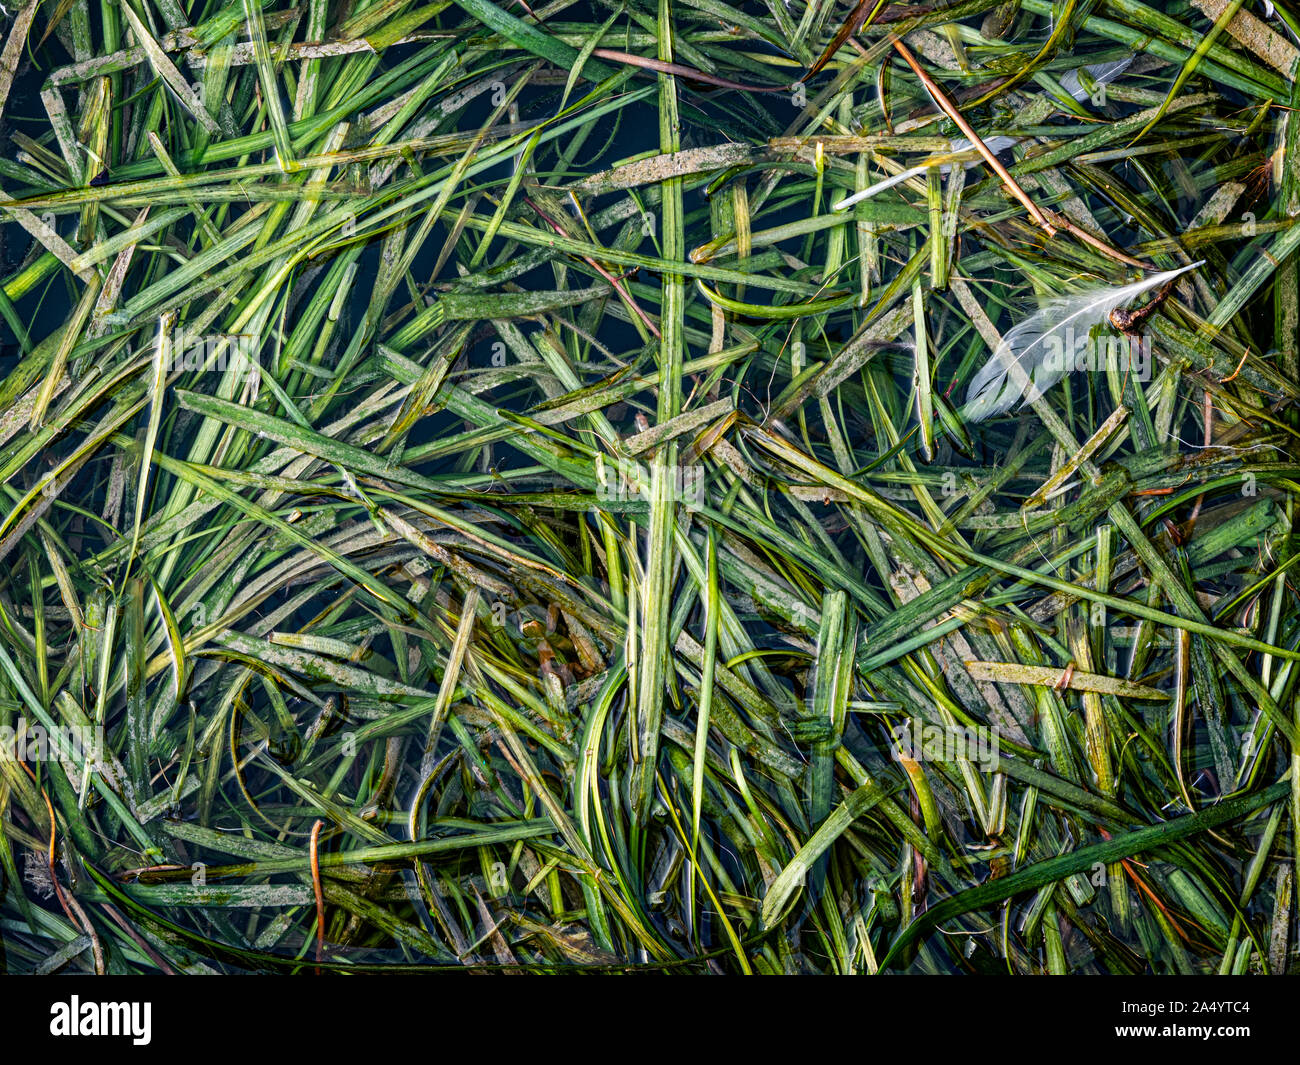 Seaweeds leaves floating on the water of a lake Stock Photo